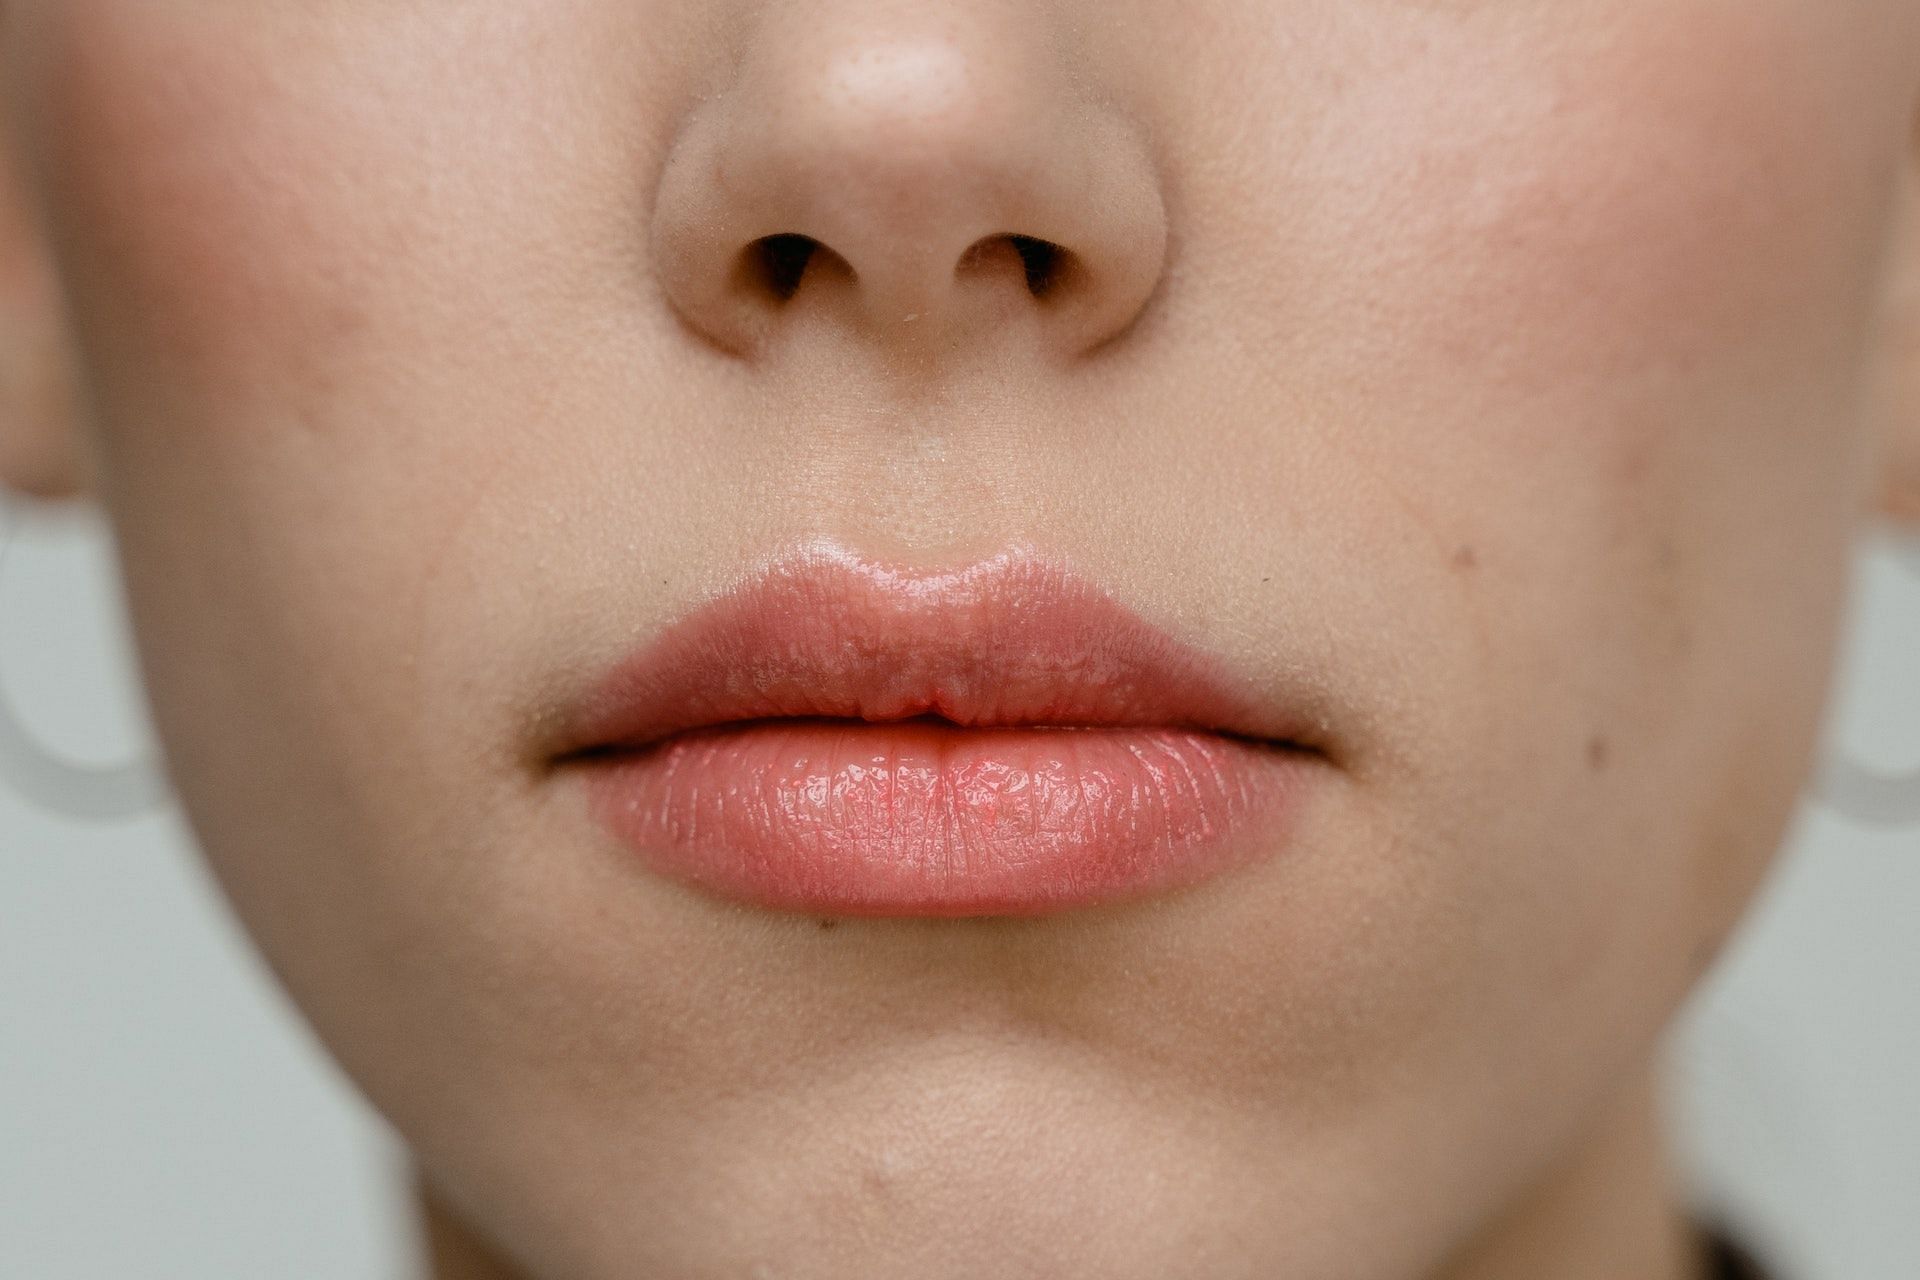 Chapped lips can be caused due to dehydration and dryness. (Photo via Pexels/MART  PRODUCTION)